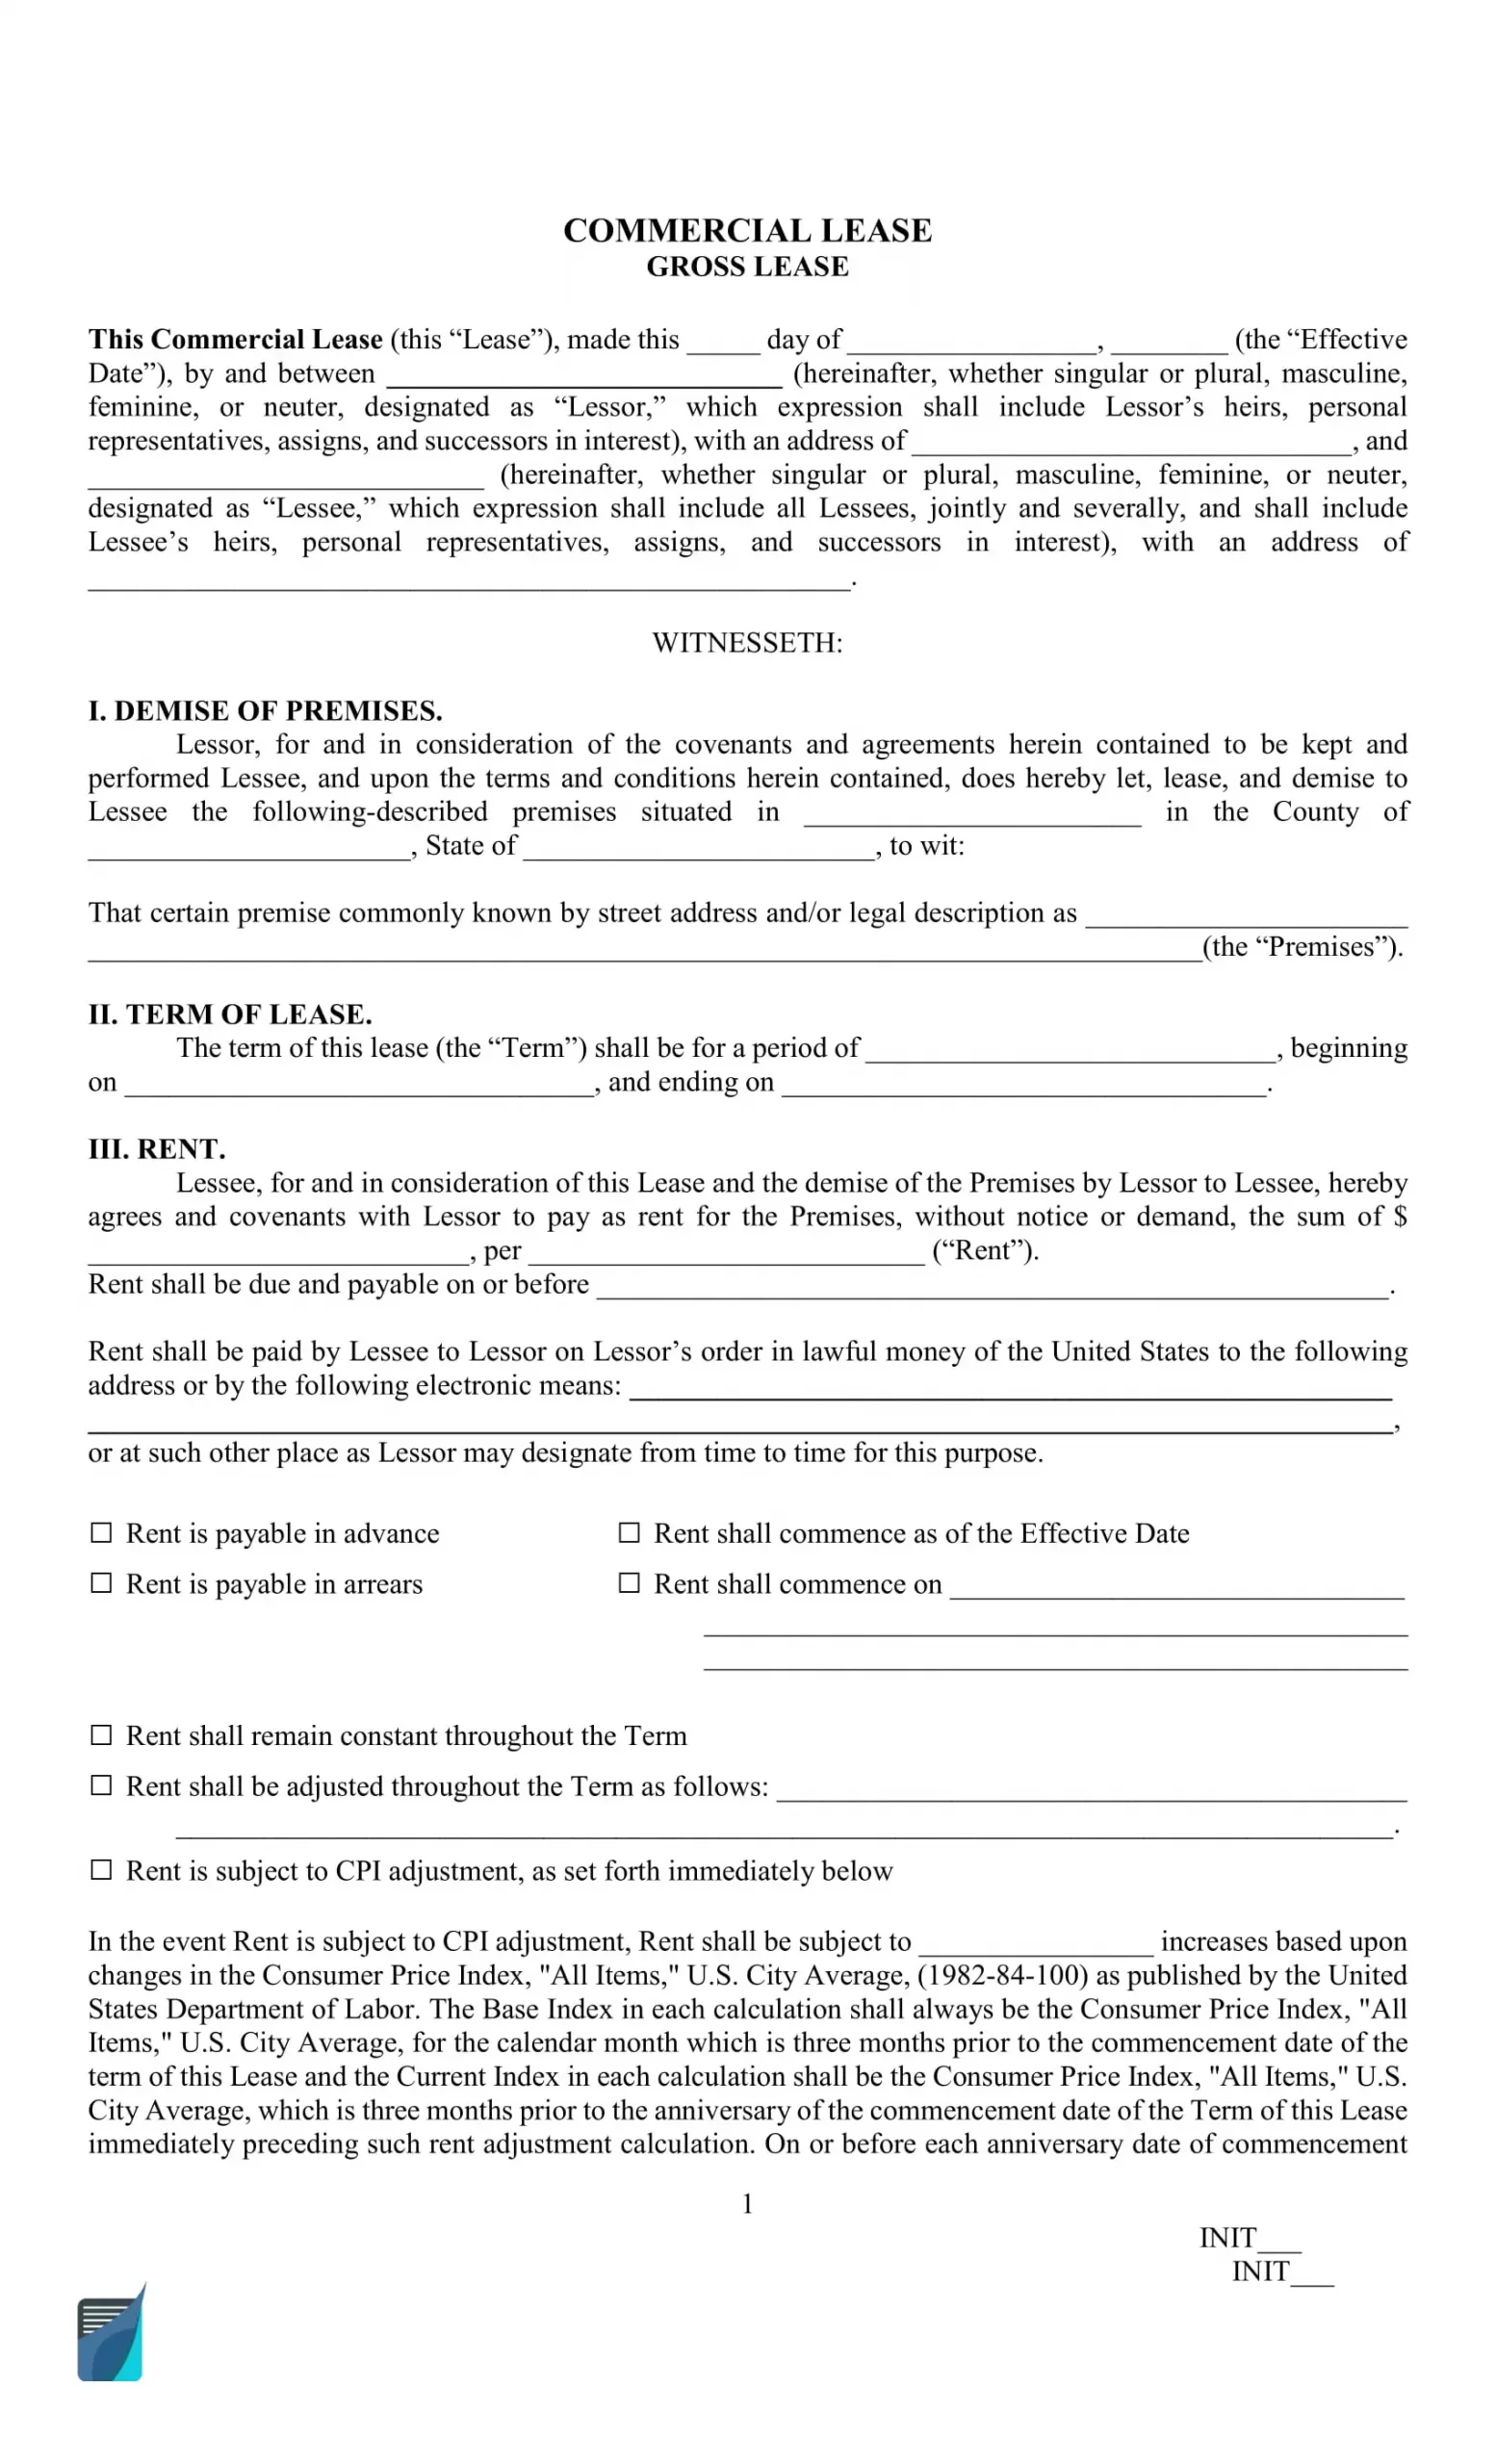 Commercial Lease Gross Form